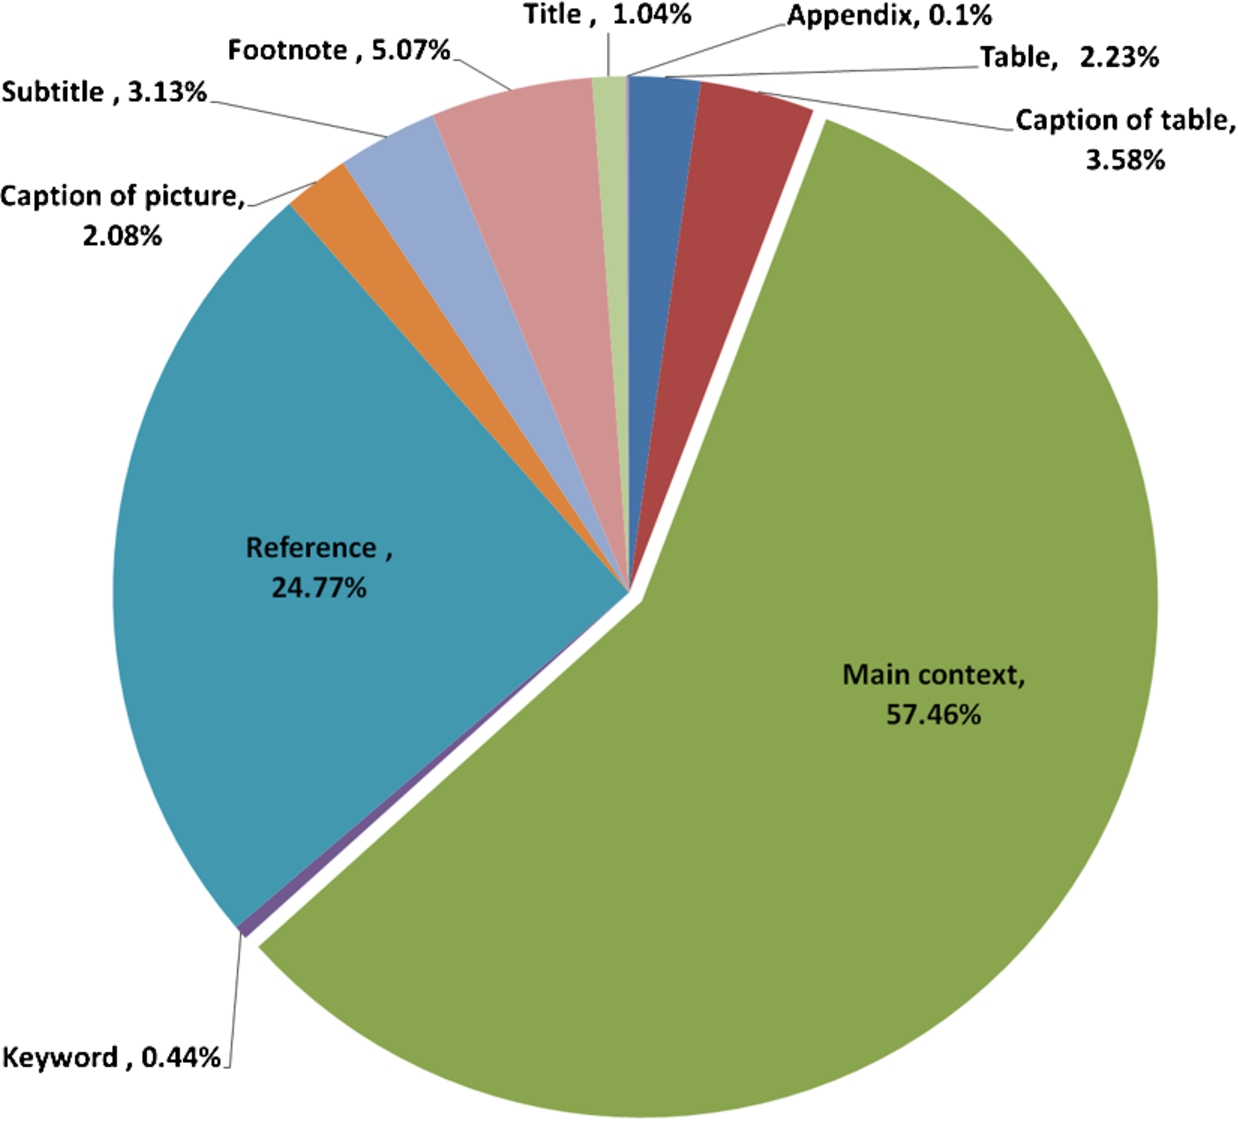 The distribution of more than 500 dataset references in 15 random articles from the mda journal (see Section 4.1).